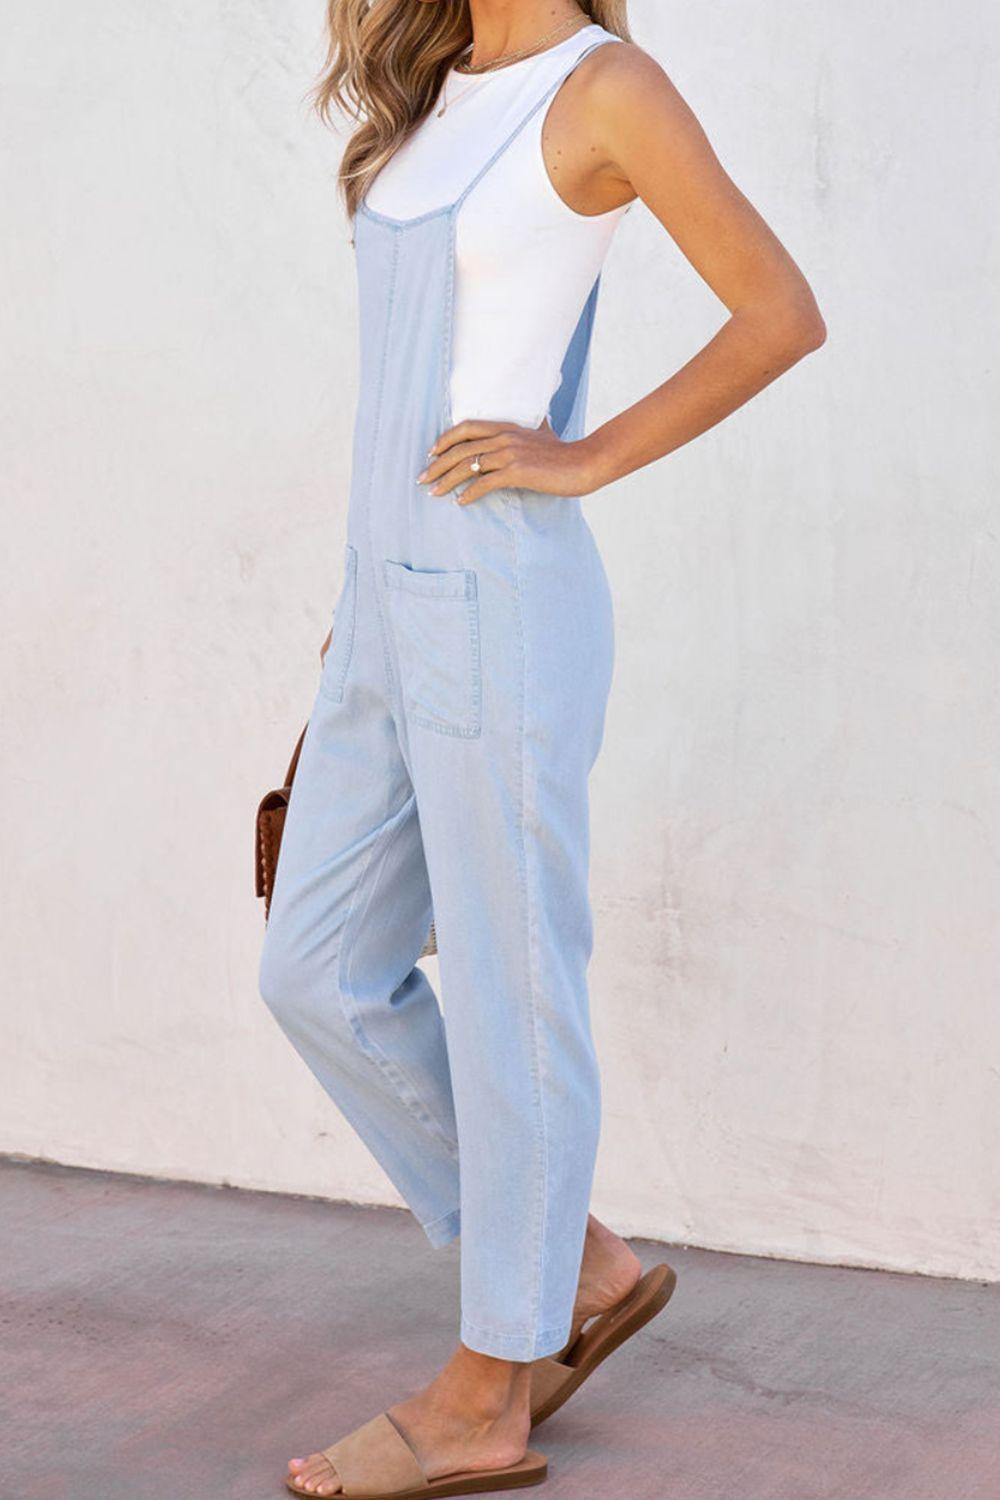 a woman in a white top and blue overalls